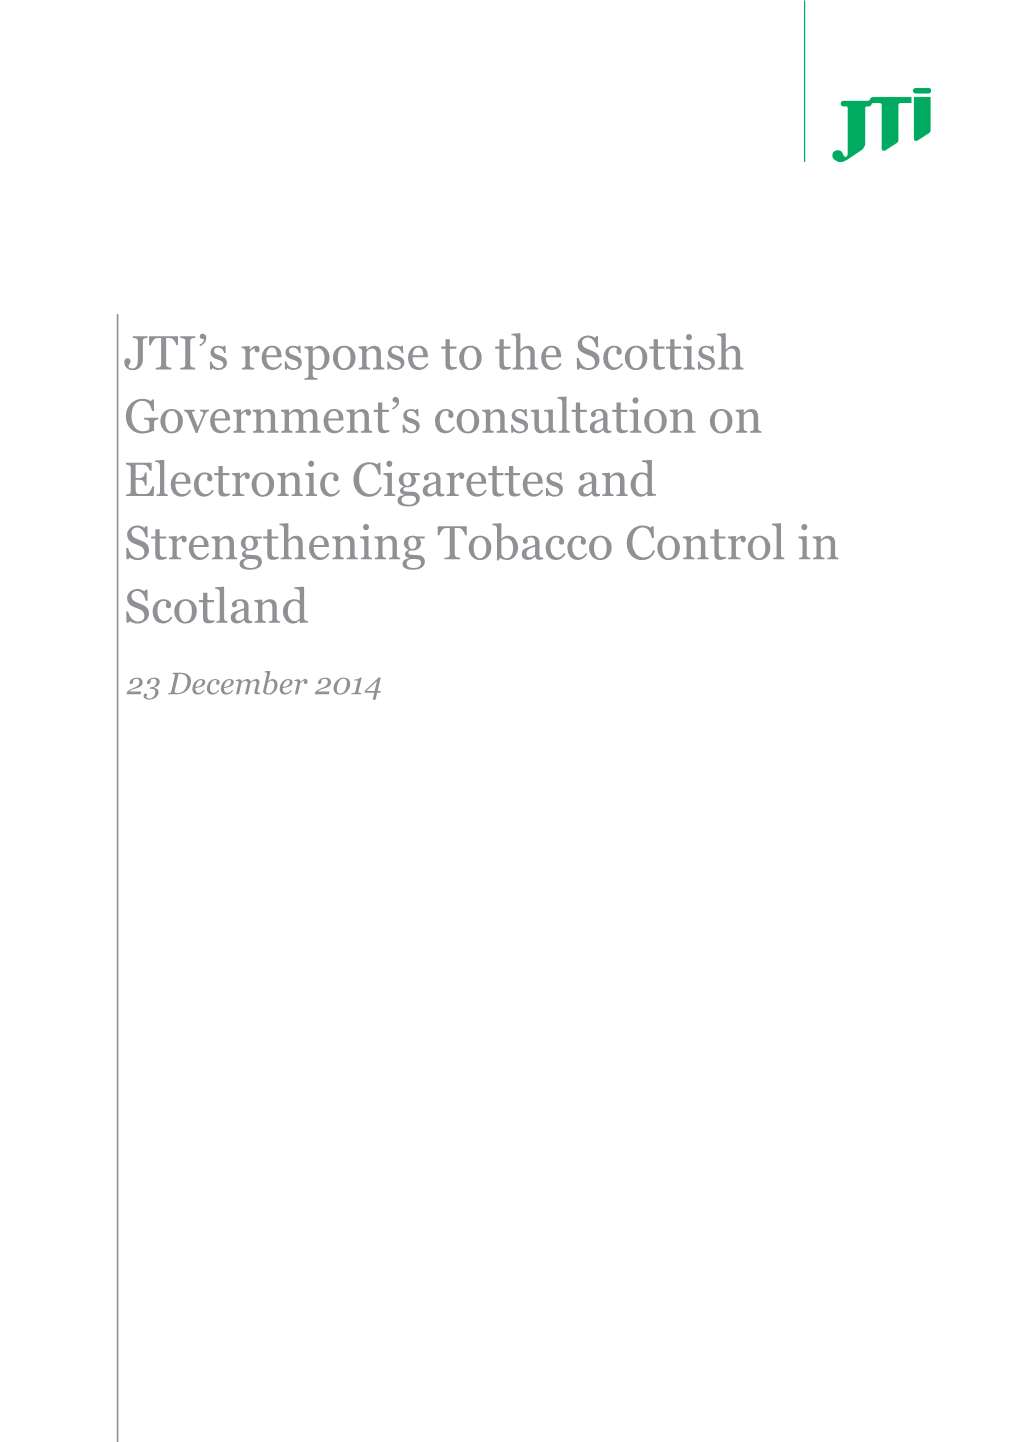 JTI’S Response to the Scottish Government’S Consultation on Electronic Cigarettes and Strengthening Tobacco Control in Scotland